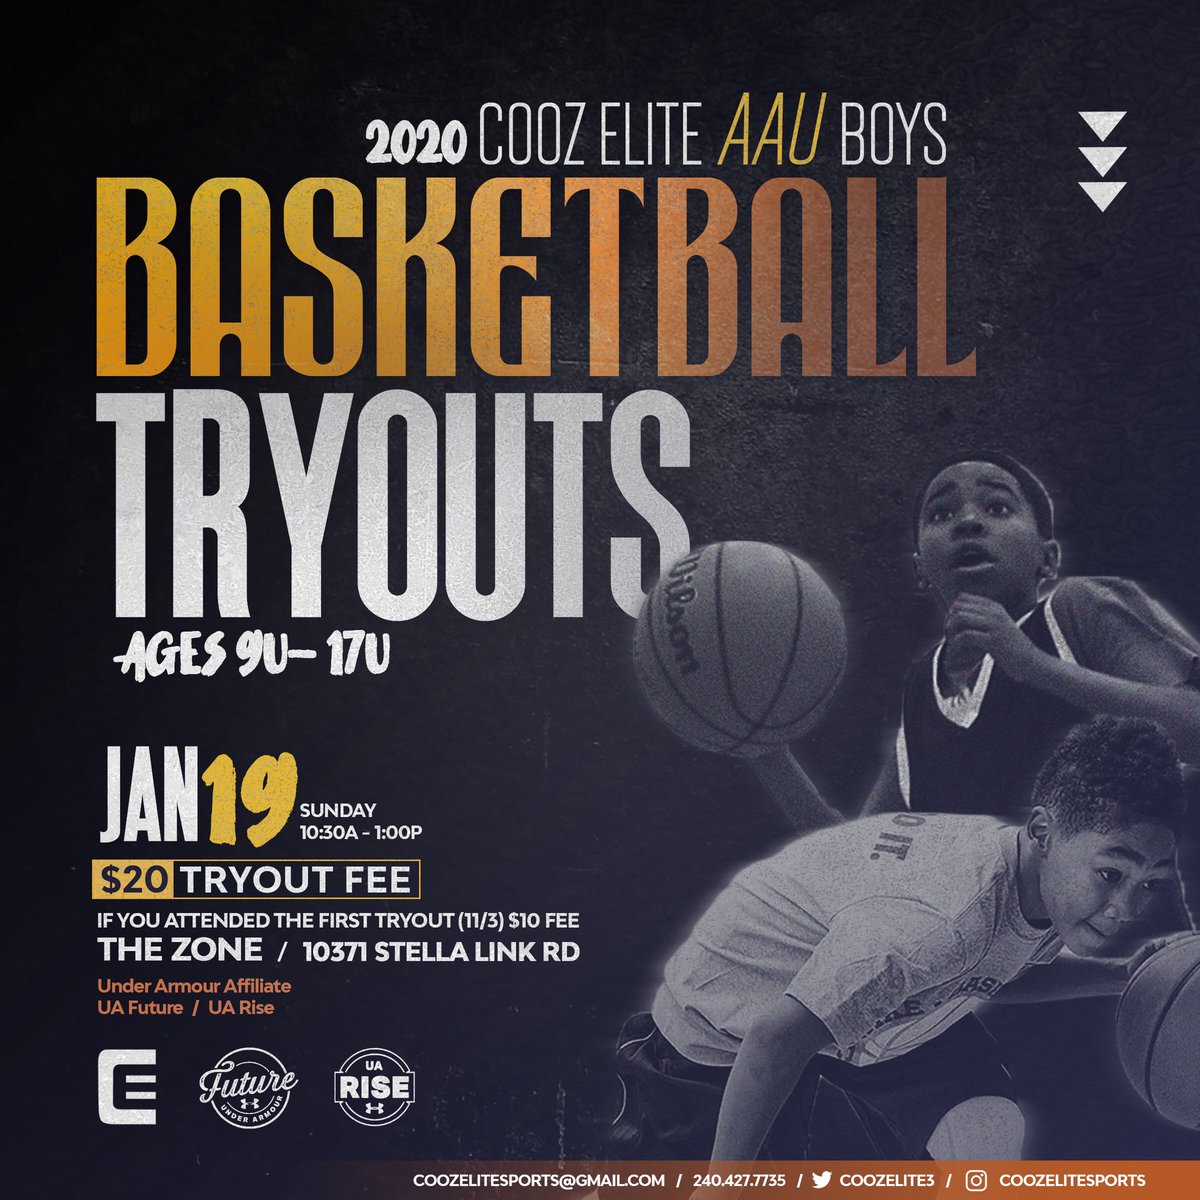 🗣JANUARY 19th, 2020 COOZ ELITE 9U-17U BOYS 2020 SEASON 🏀 TRYOUTS.... COME AND JOIN THE COOZ FAMILY AS WE PREPARE FOR ANOTHER HEAD TURNING SPRING/SUMMER... #AAU #BAsketball #COOZELITE #COOZReloaded #Houston #Boysbasketball #AAUBasketball  #UARise #UAFuture